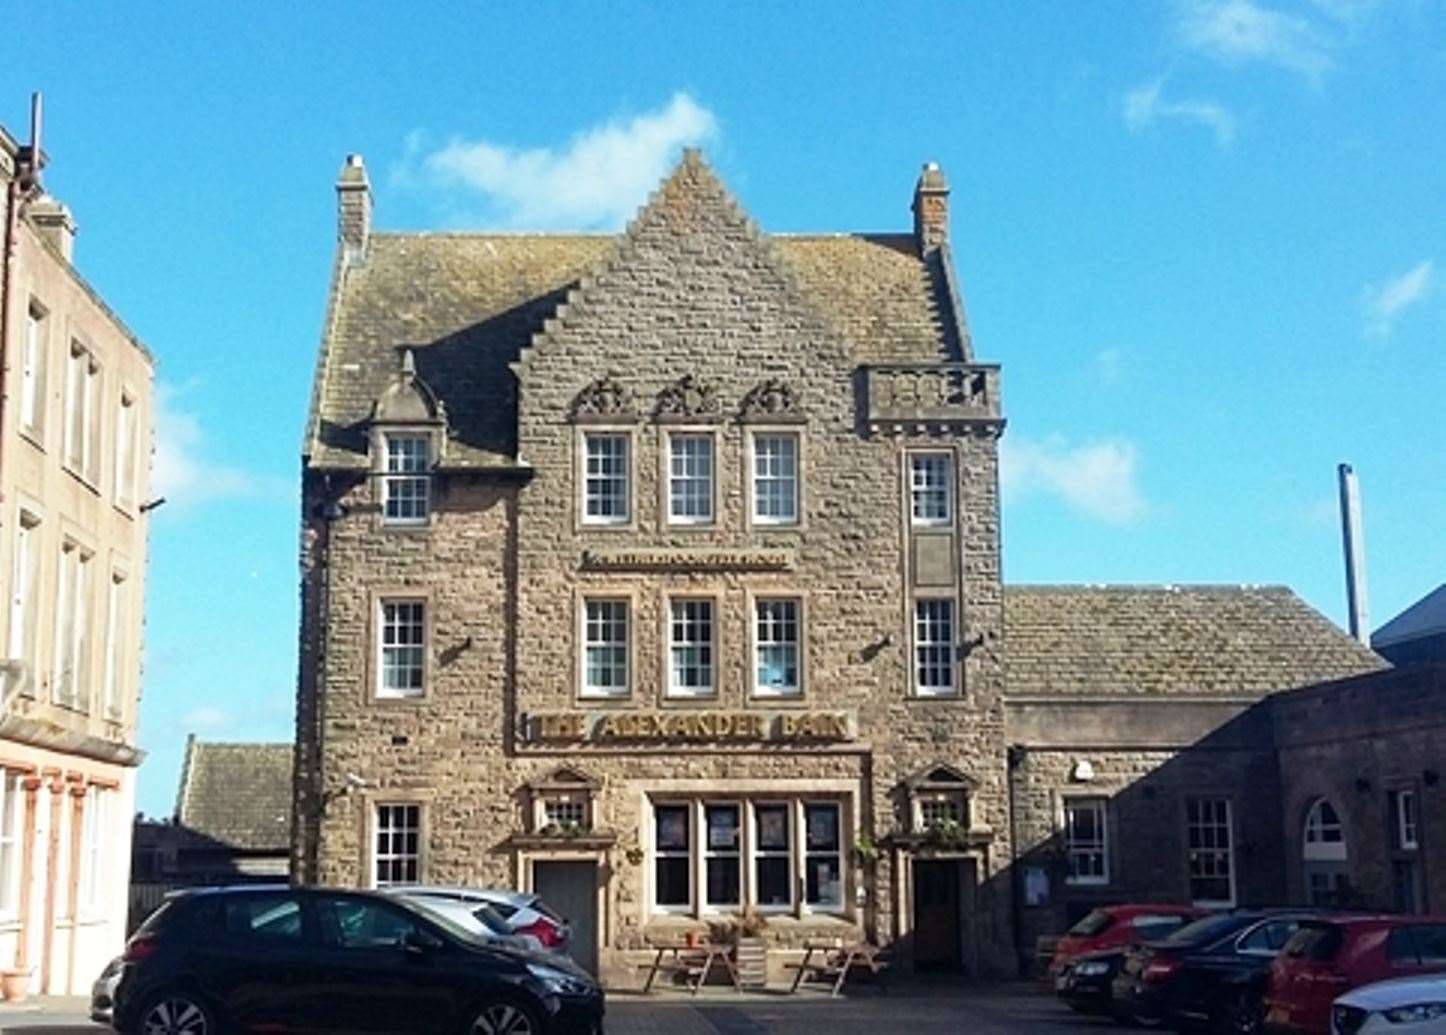 JD Wetherspoon media desk said that The Alexander Bain in Wick is not earmarked to close.